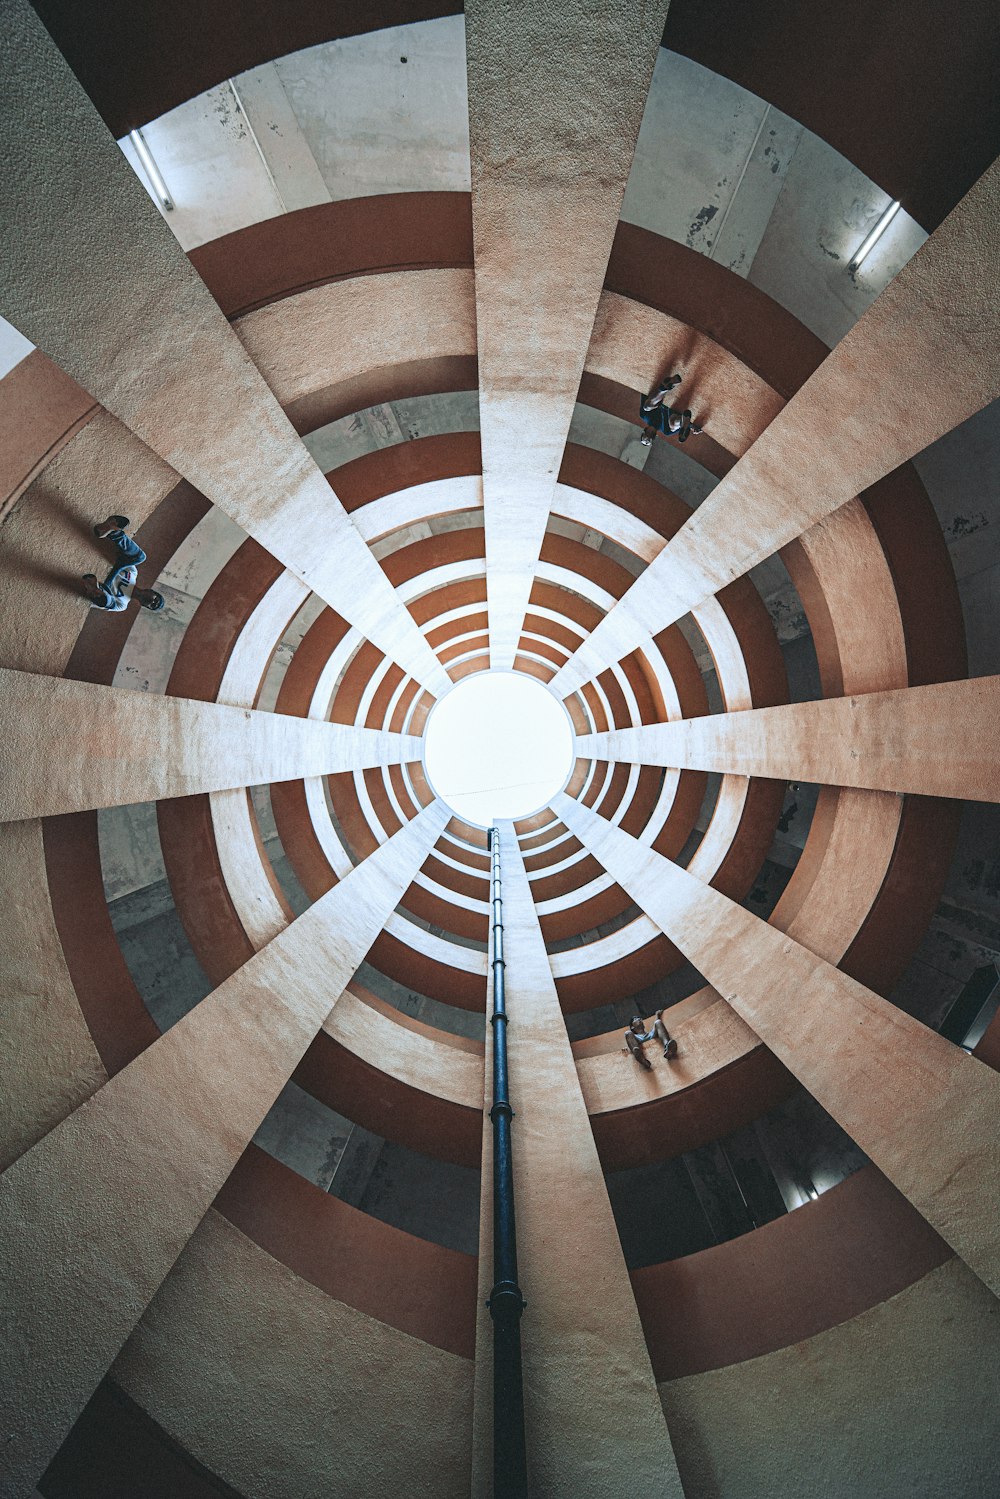 spiral view of people inside building